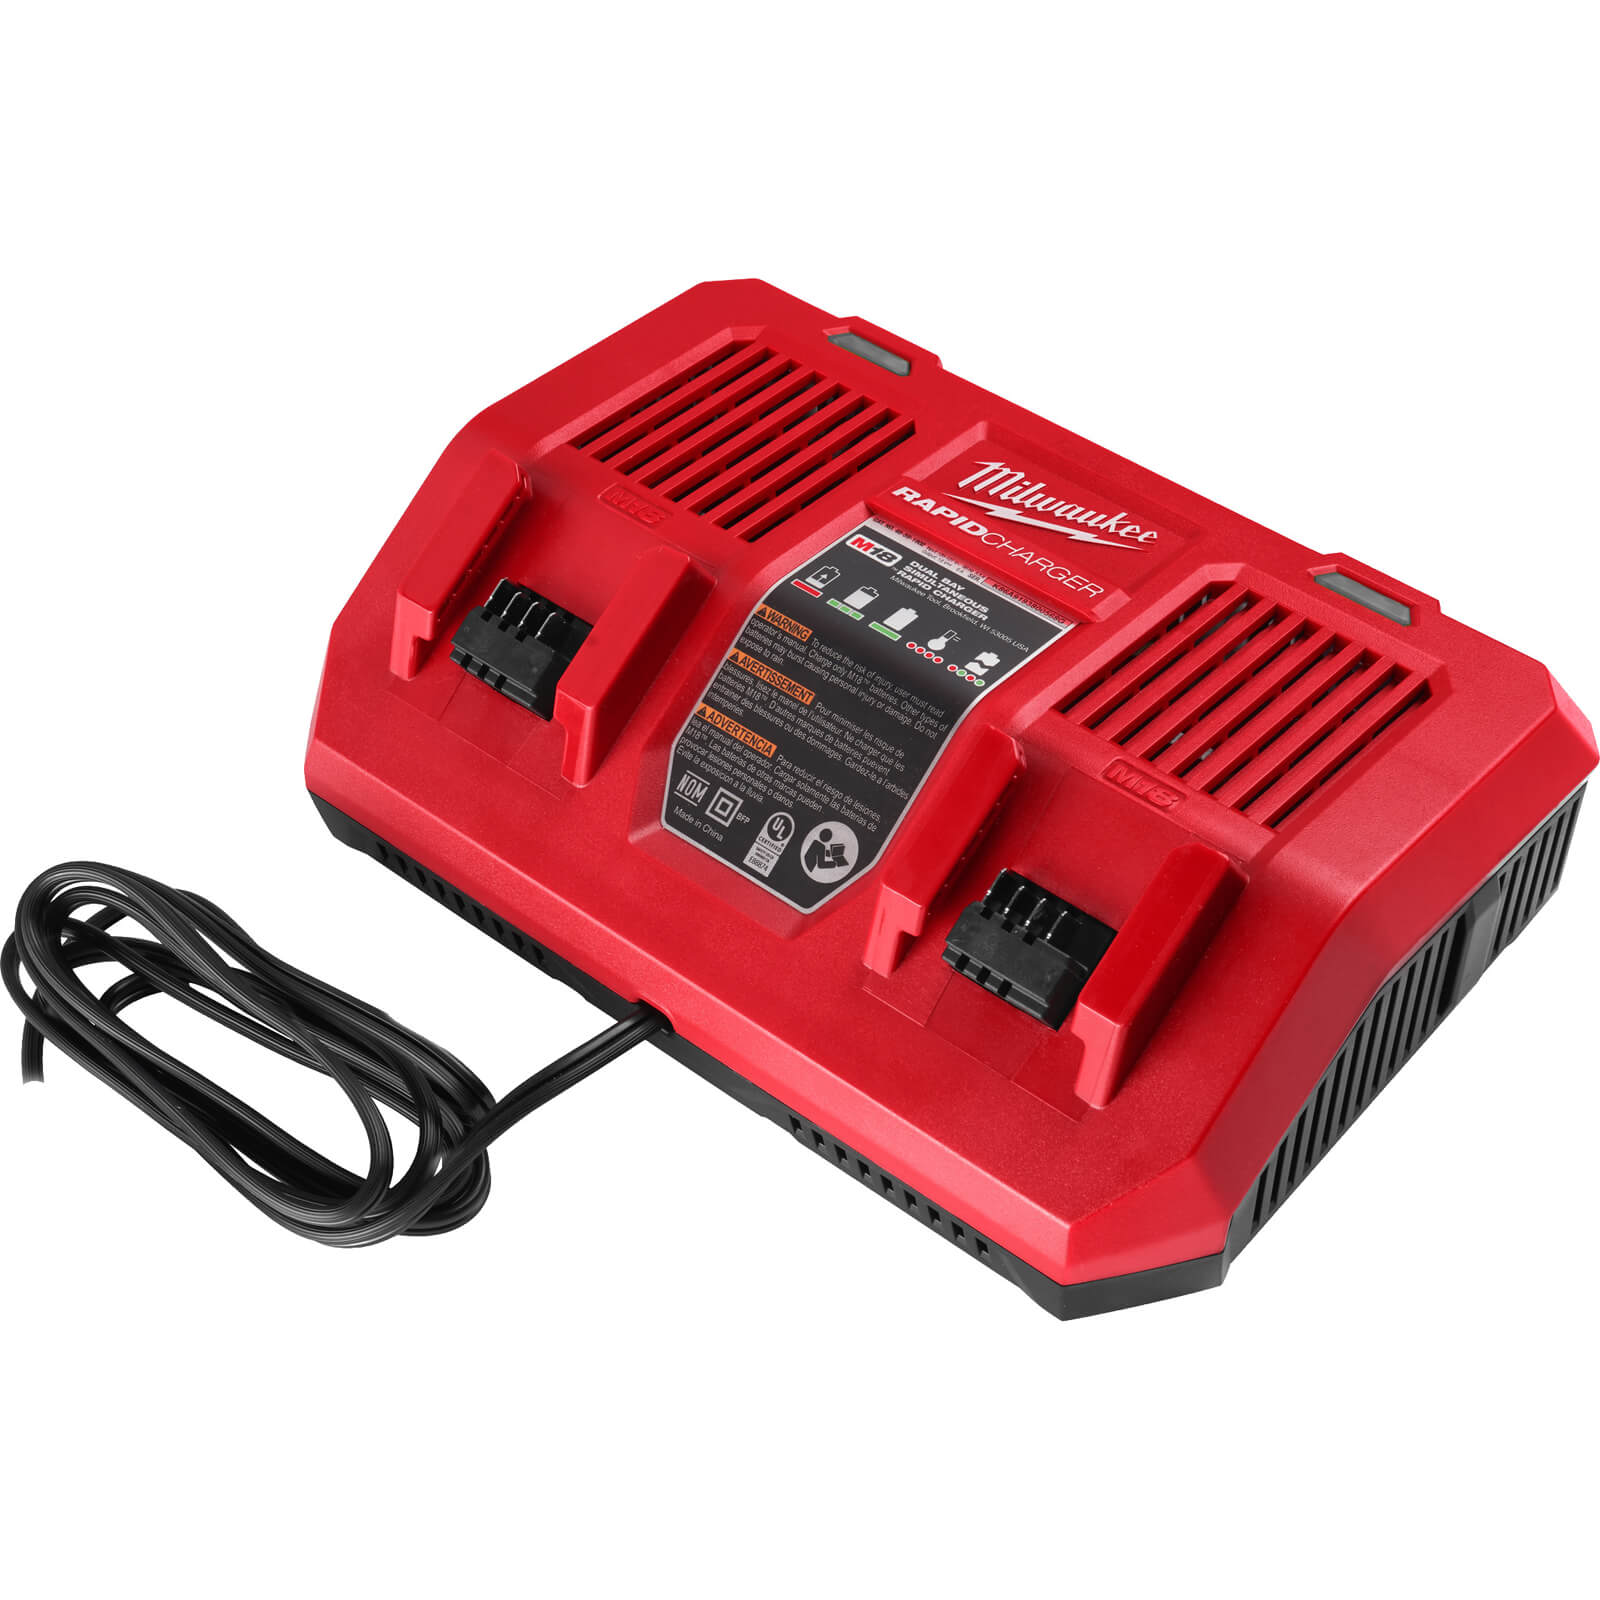 Photos - Power Tool Battery Milwaukee M18 DFC 18v Dual Bay Rapid Battery Charger 240v M18DFC 